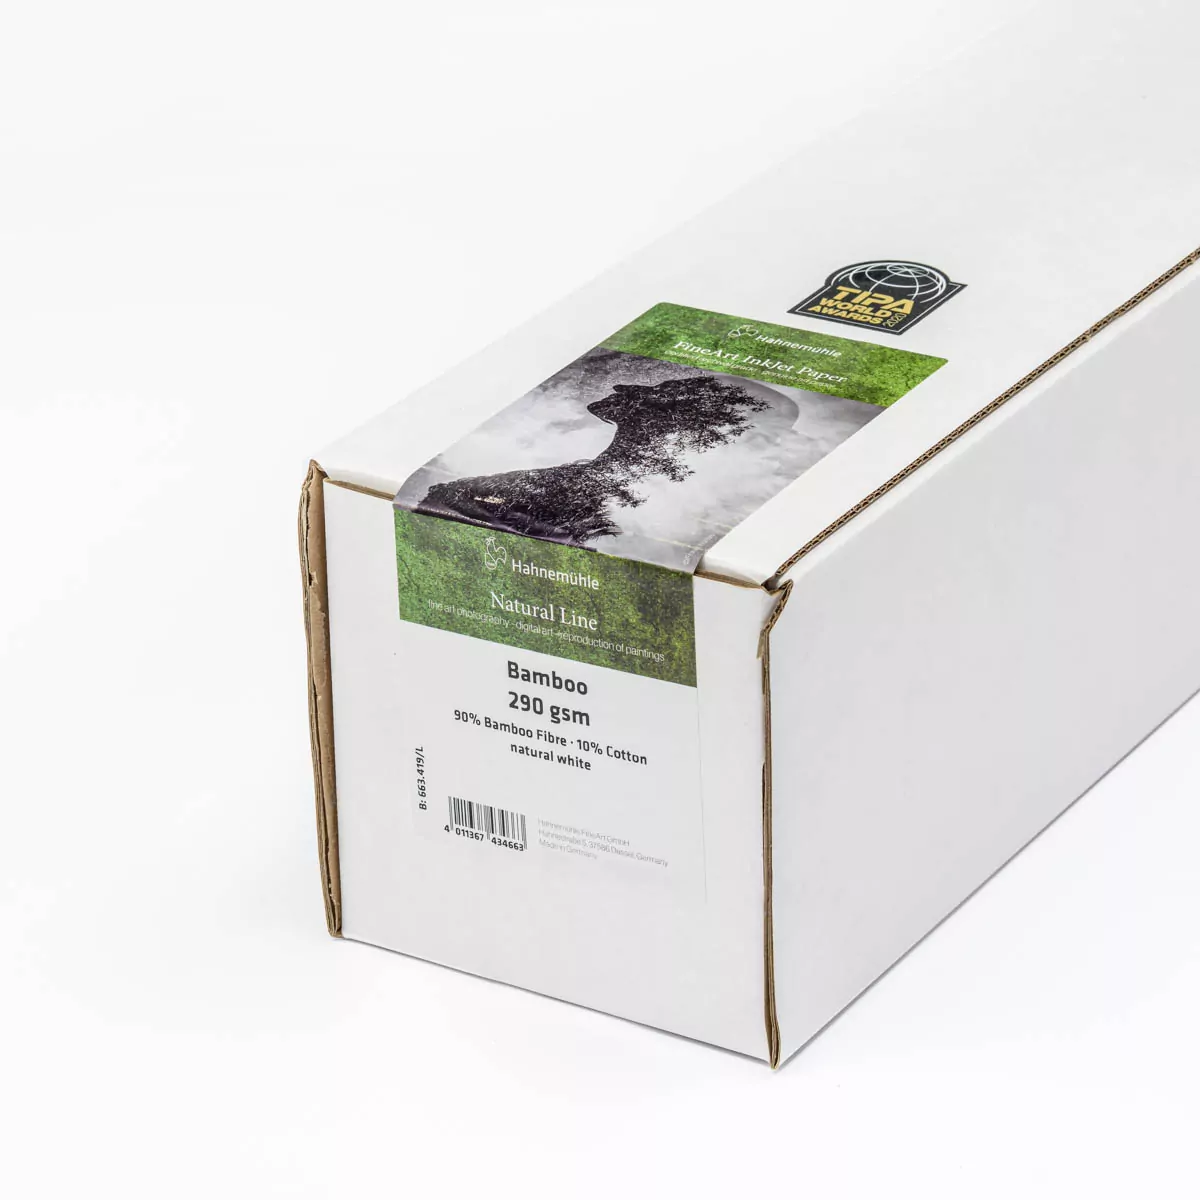 Hahnemuhle Bamboo 290gsm 44”(111cm)x12m roll